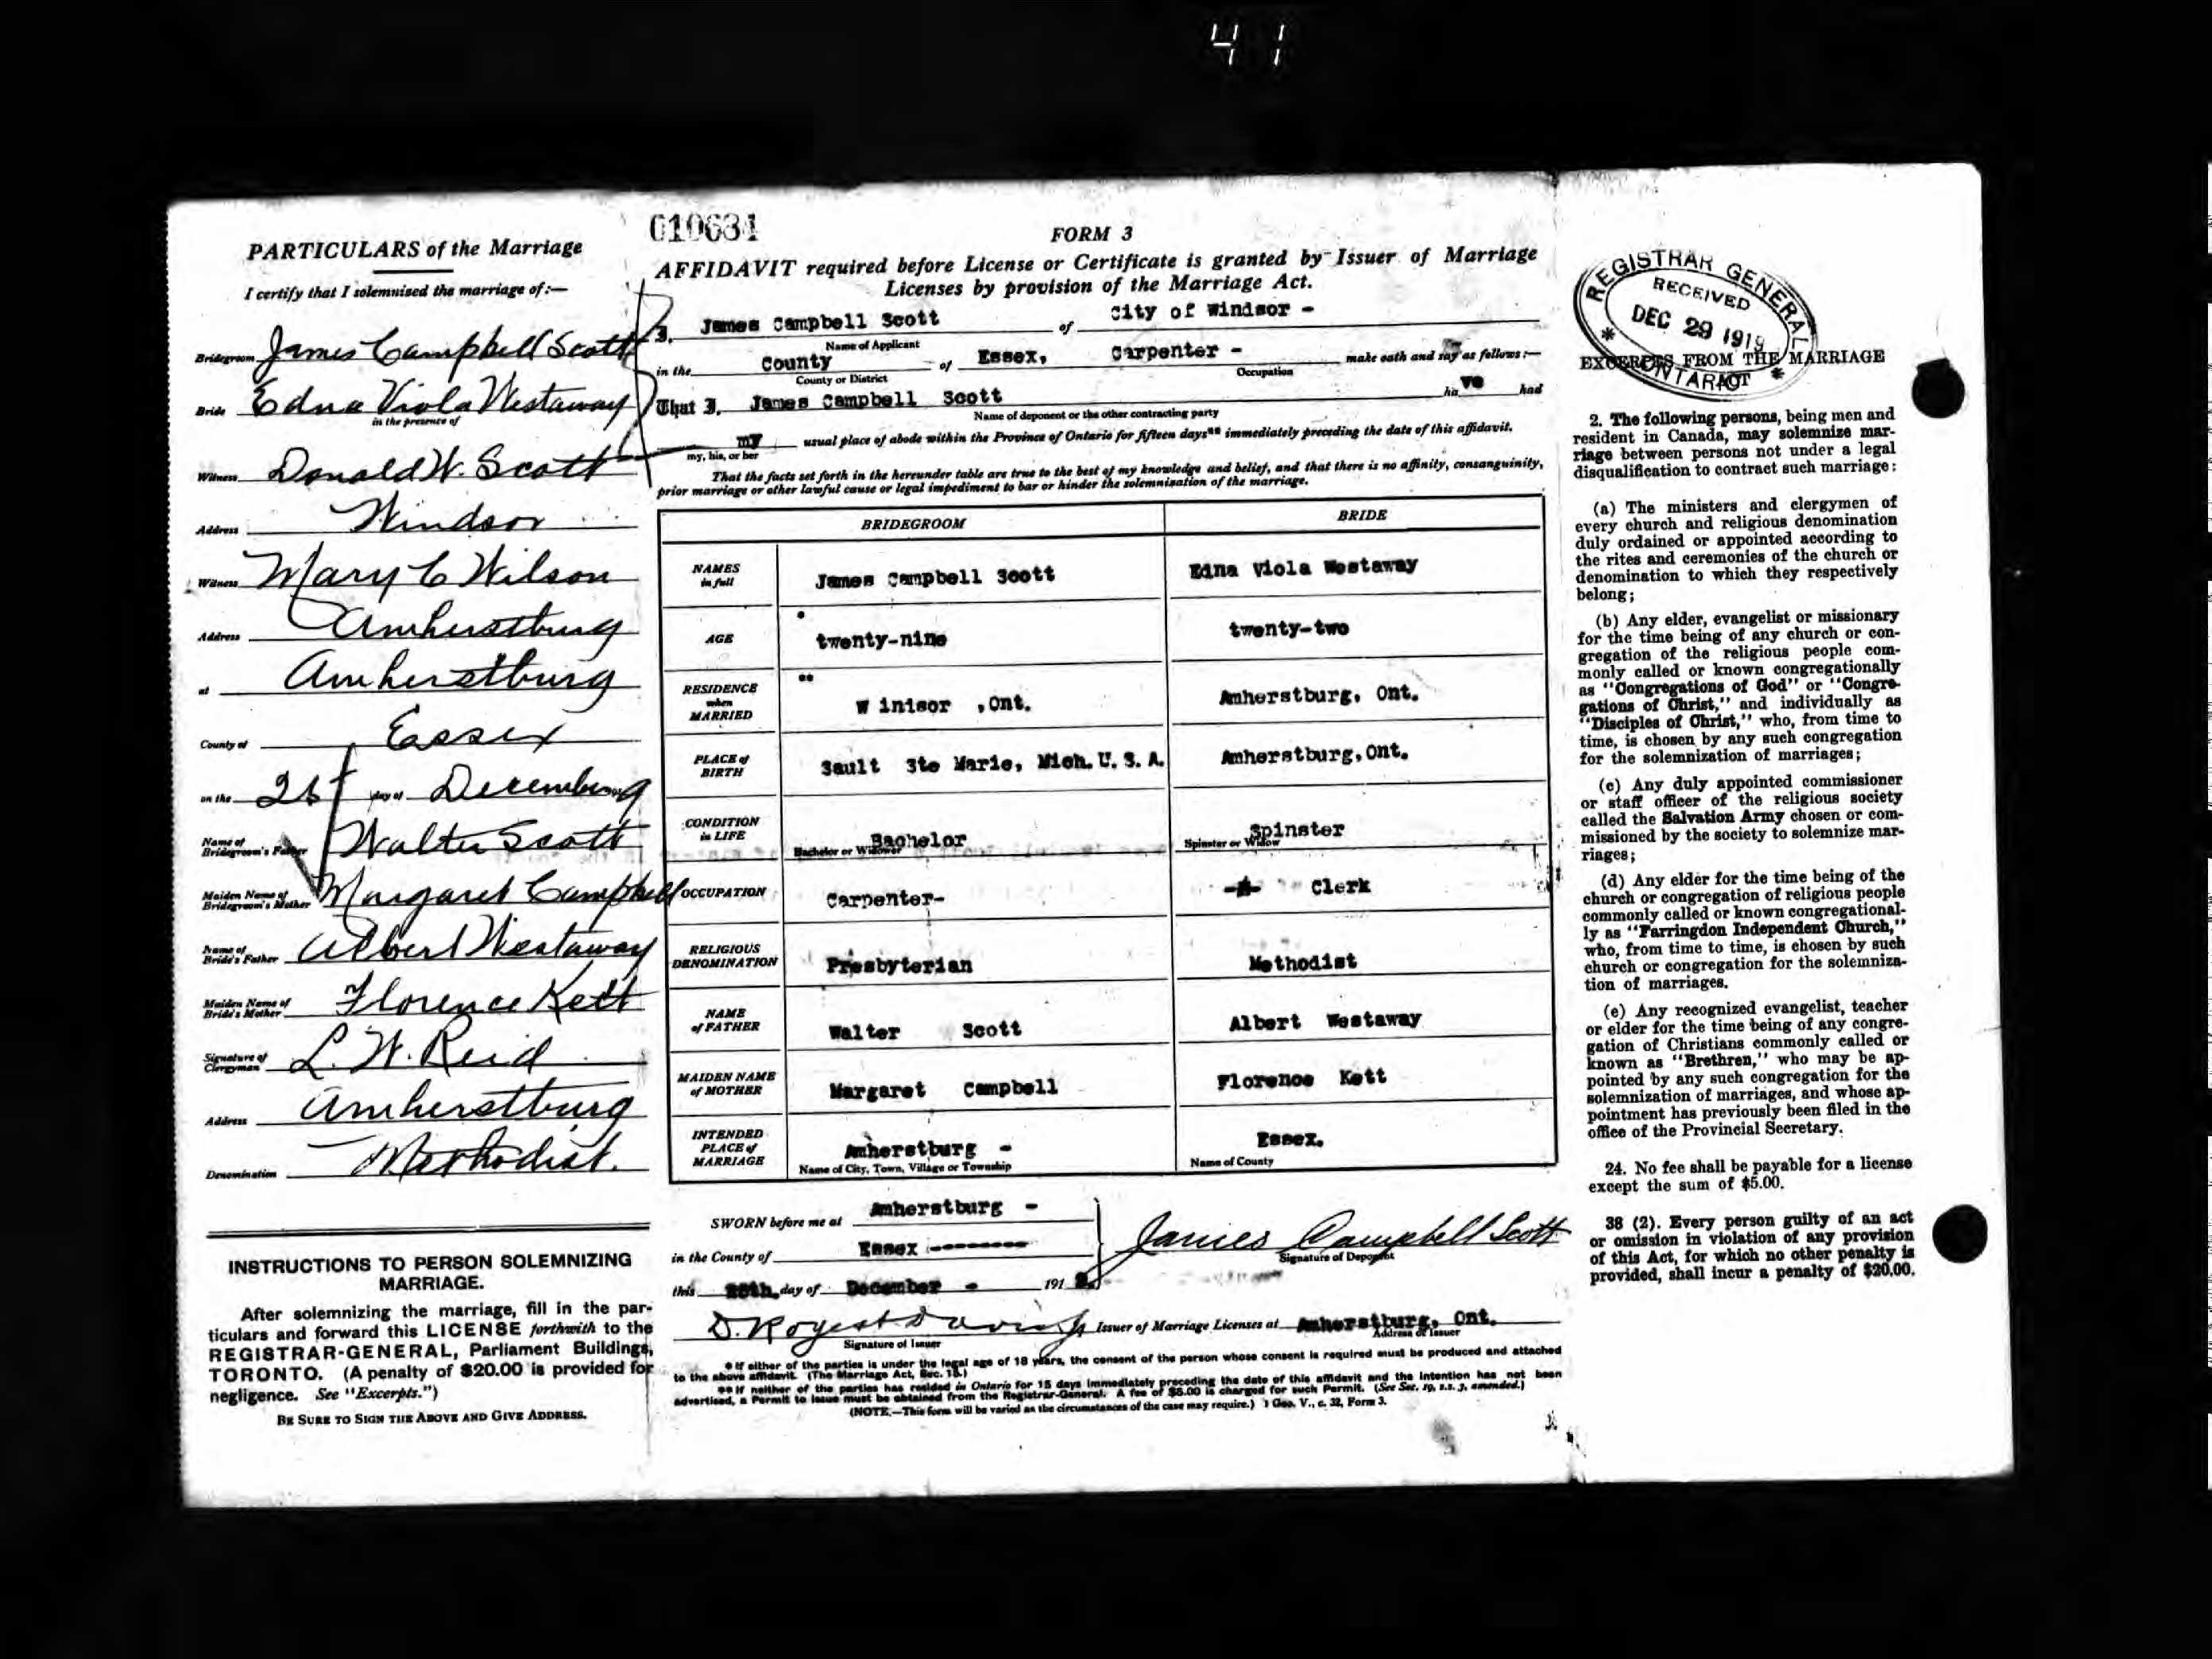 james-campbell-scott-1st-marriage